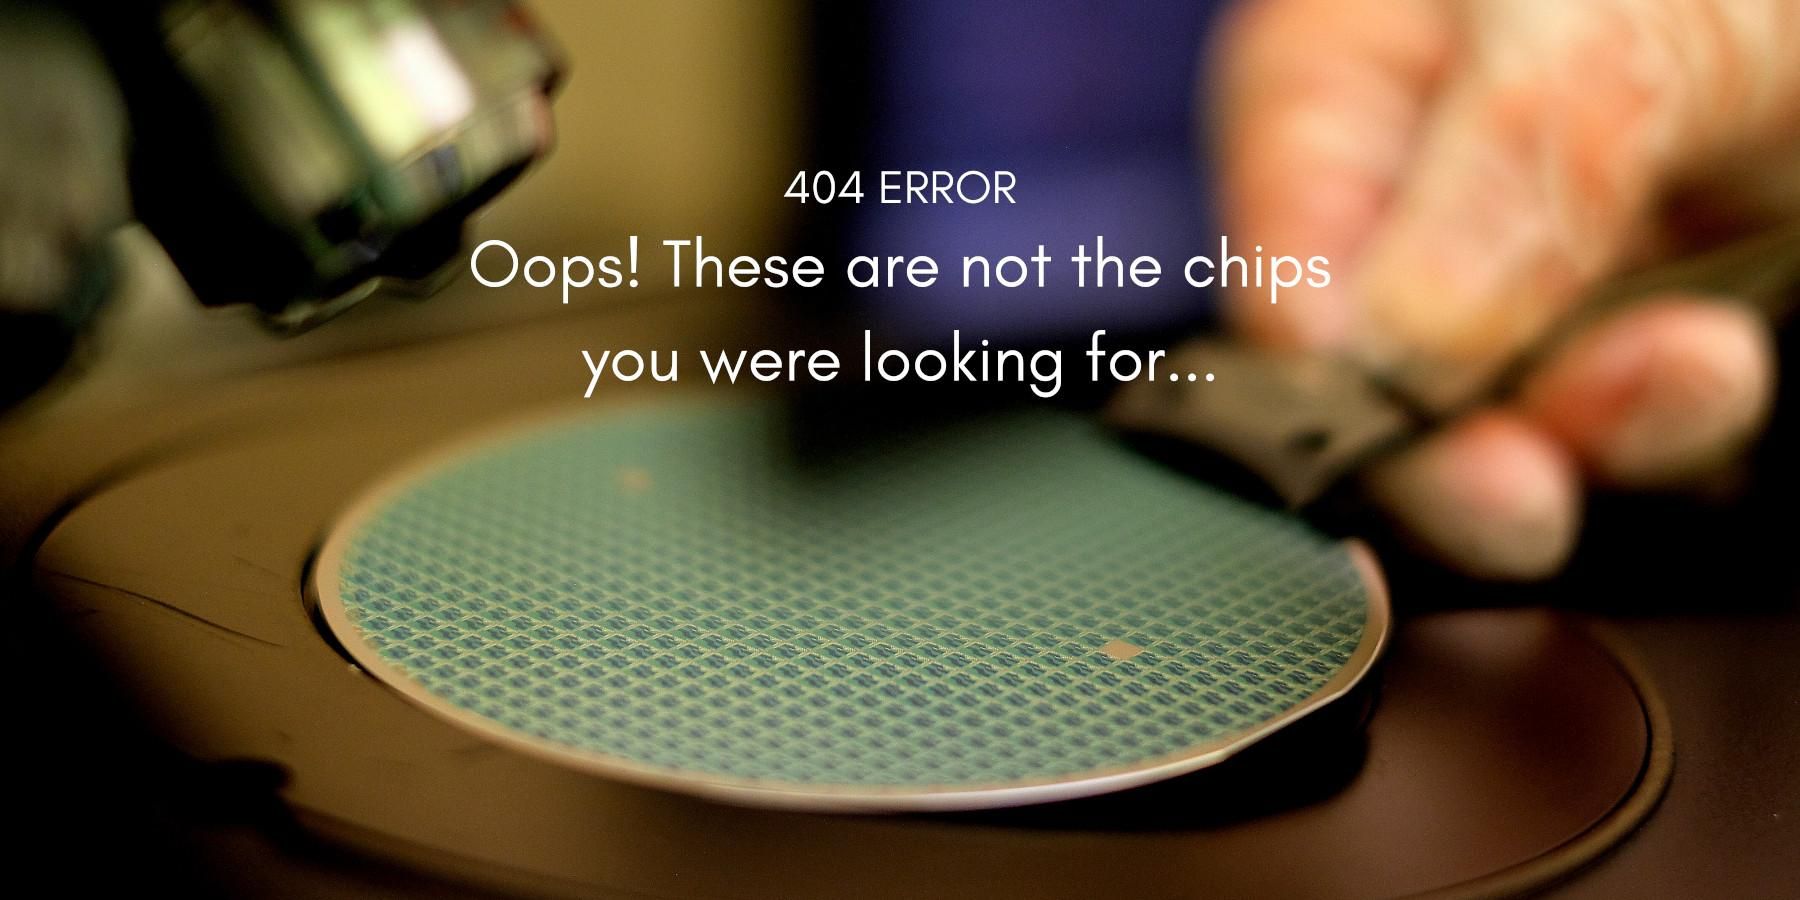 Error 404 Oops! These are not the chips you were looking for